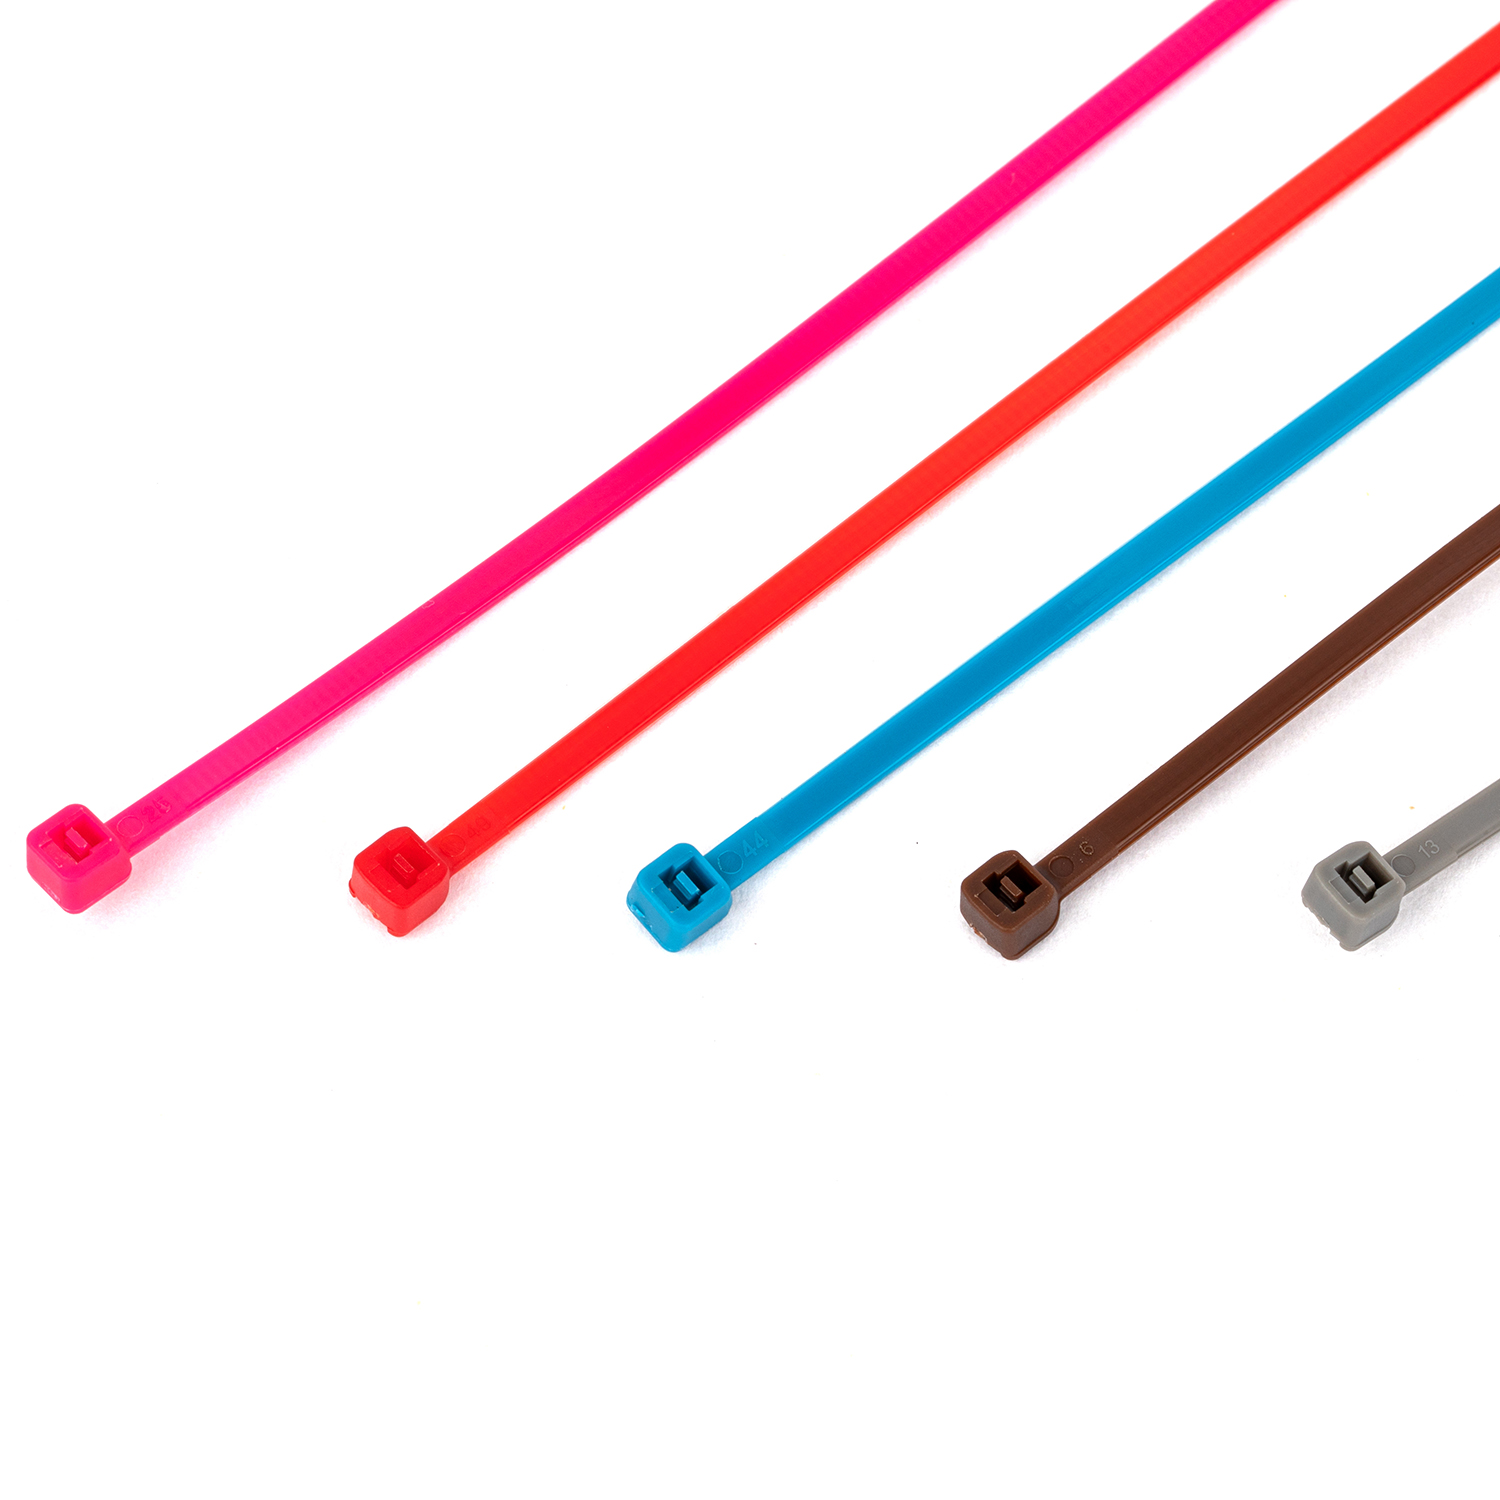 Nylon cable tie, cold resistant Cable tie, 3 * 4 * 5 * 8 * 100 * 150 * 200 * 250 * 300, complete in specifications